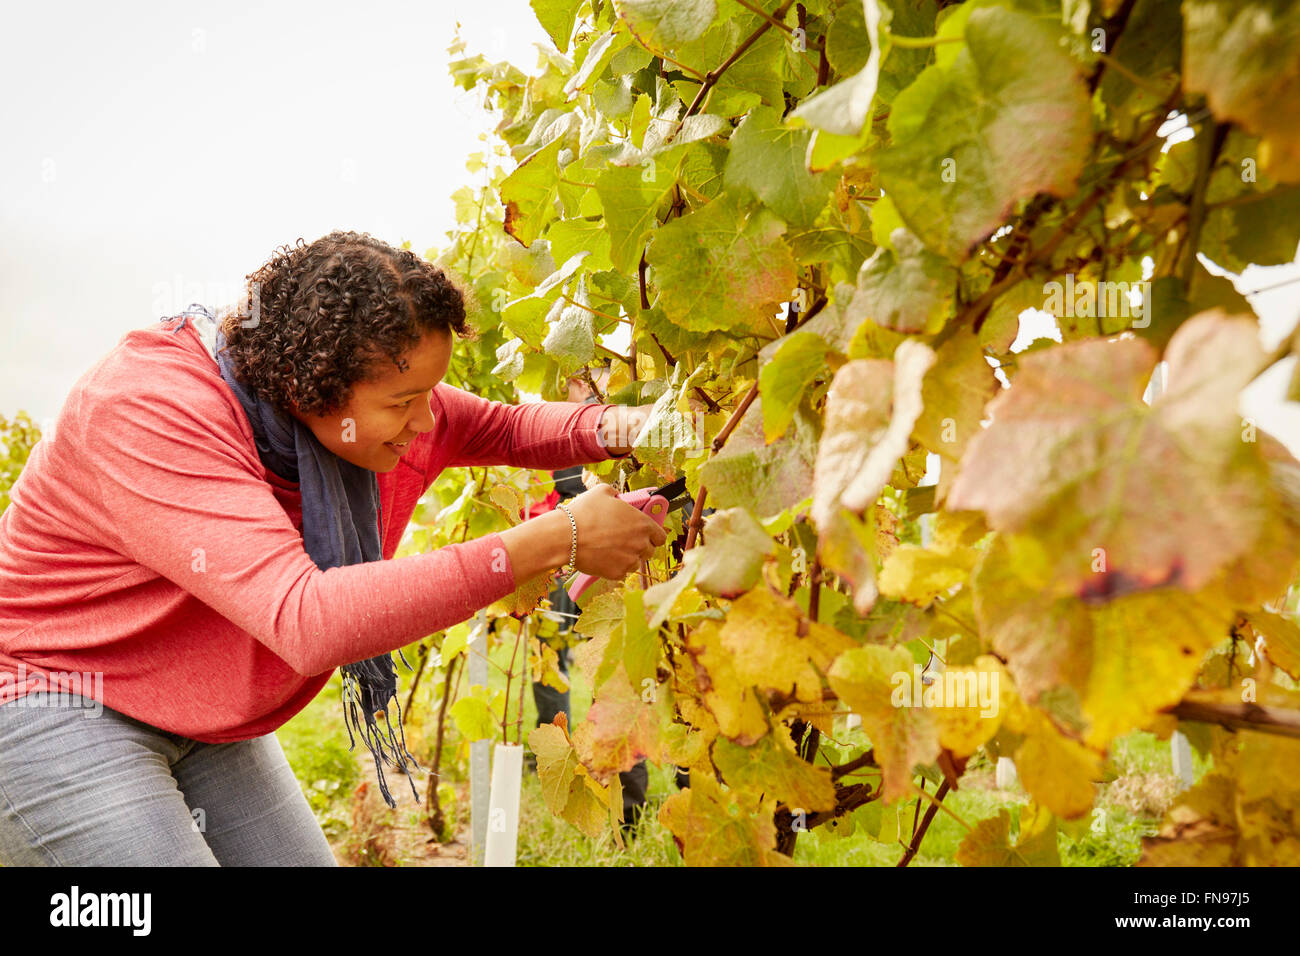 A grape picker leaning down and selecting bunches of grapes for harvest. Stock Photo